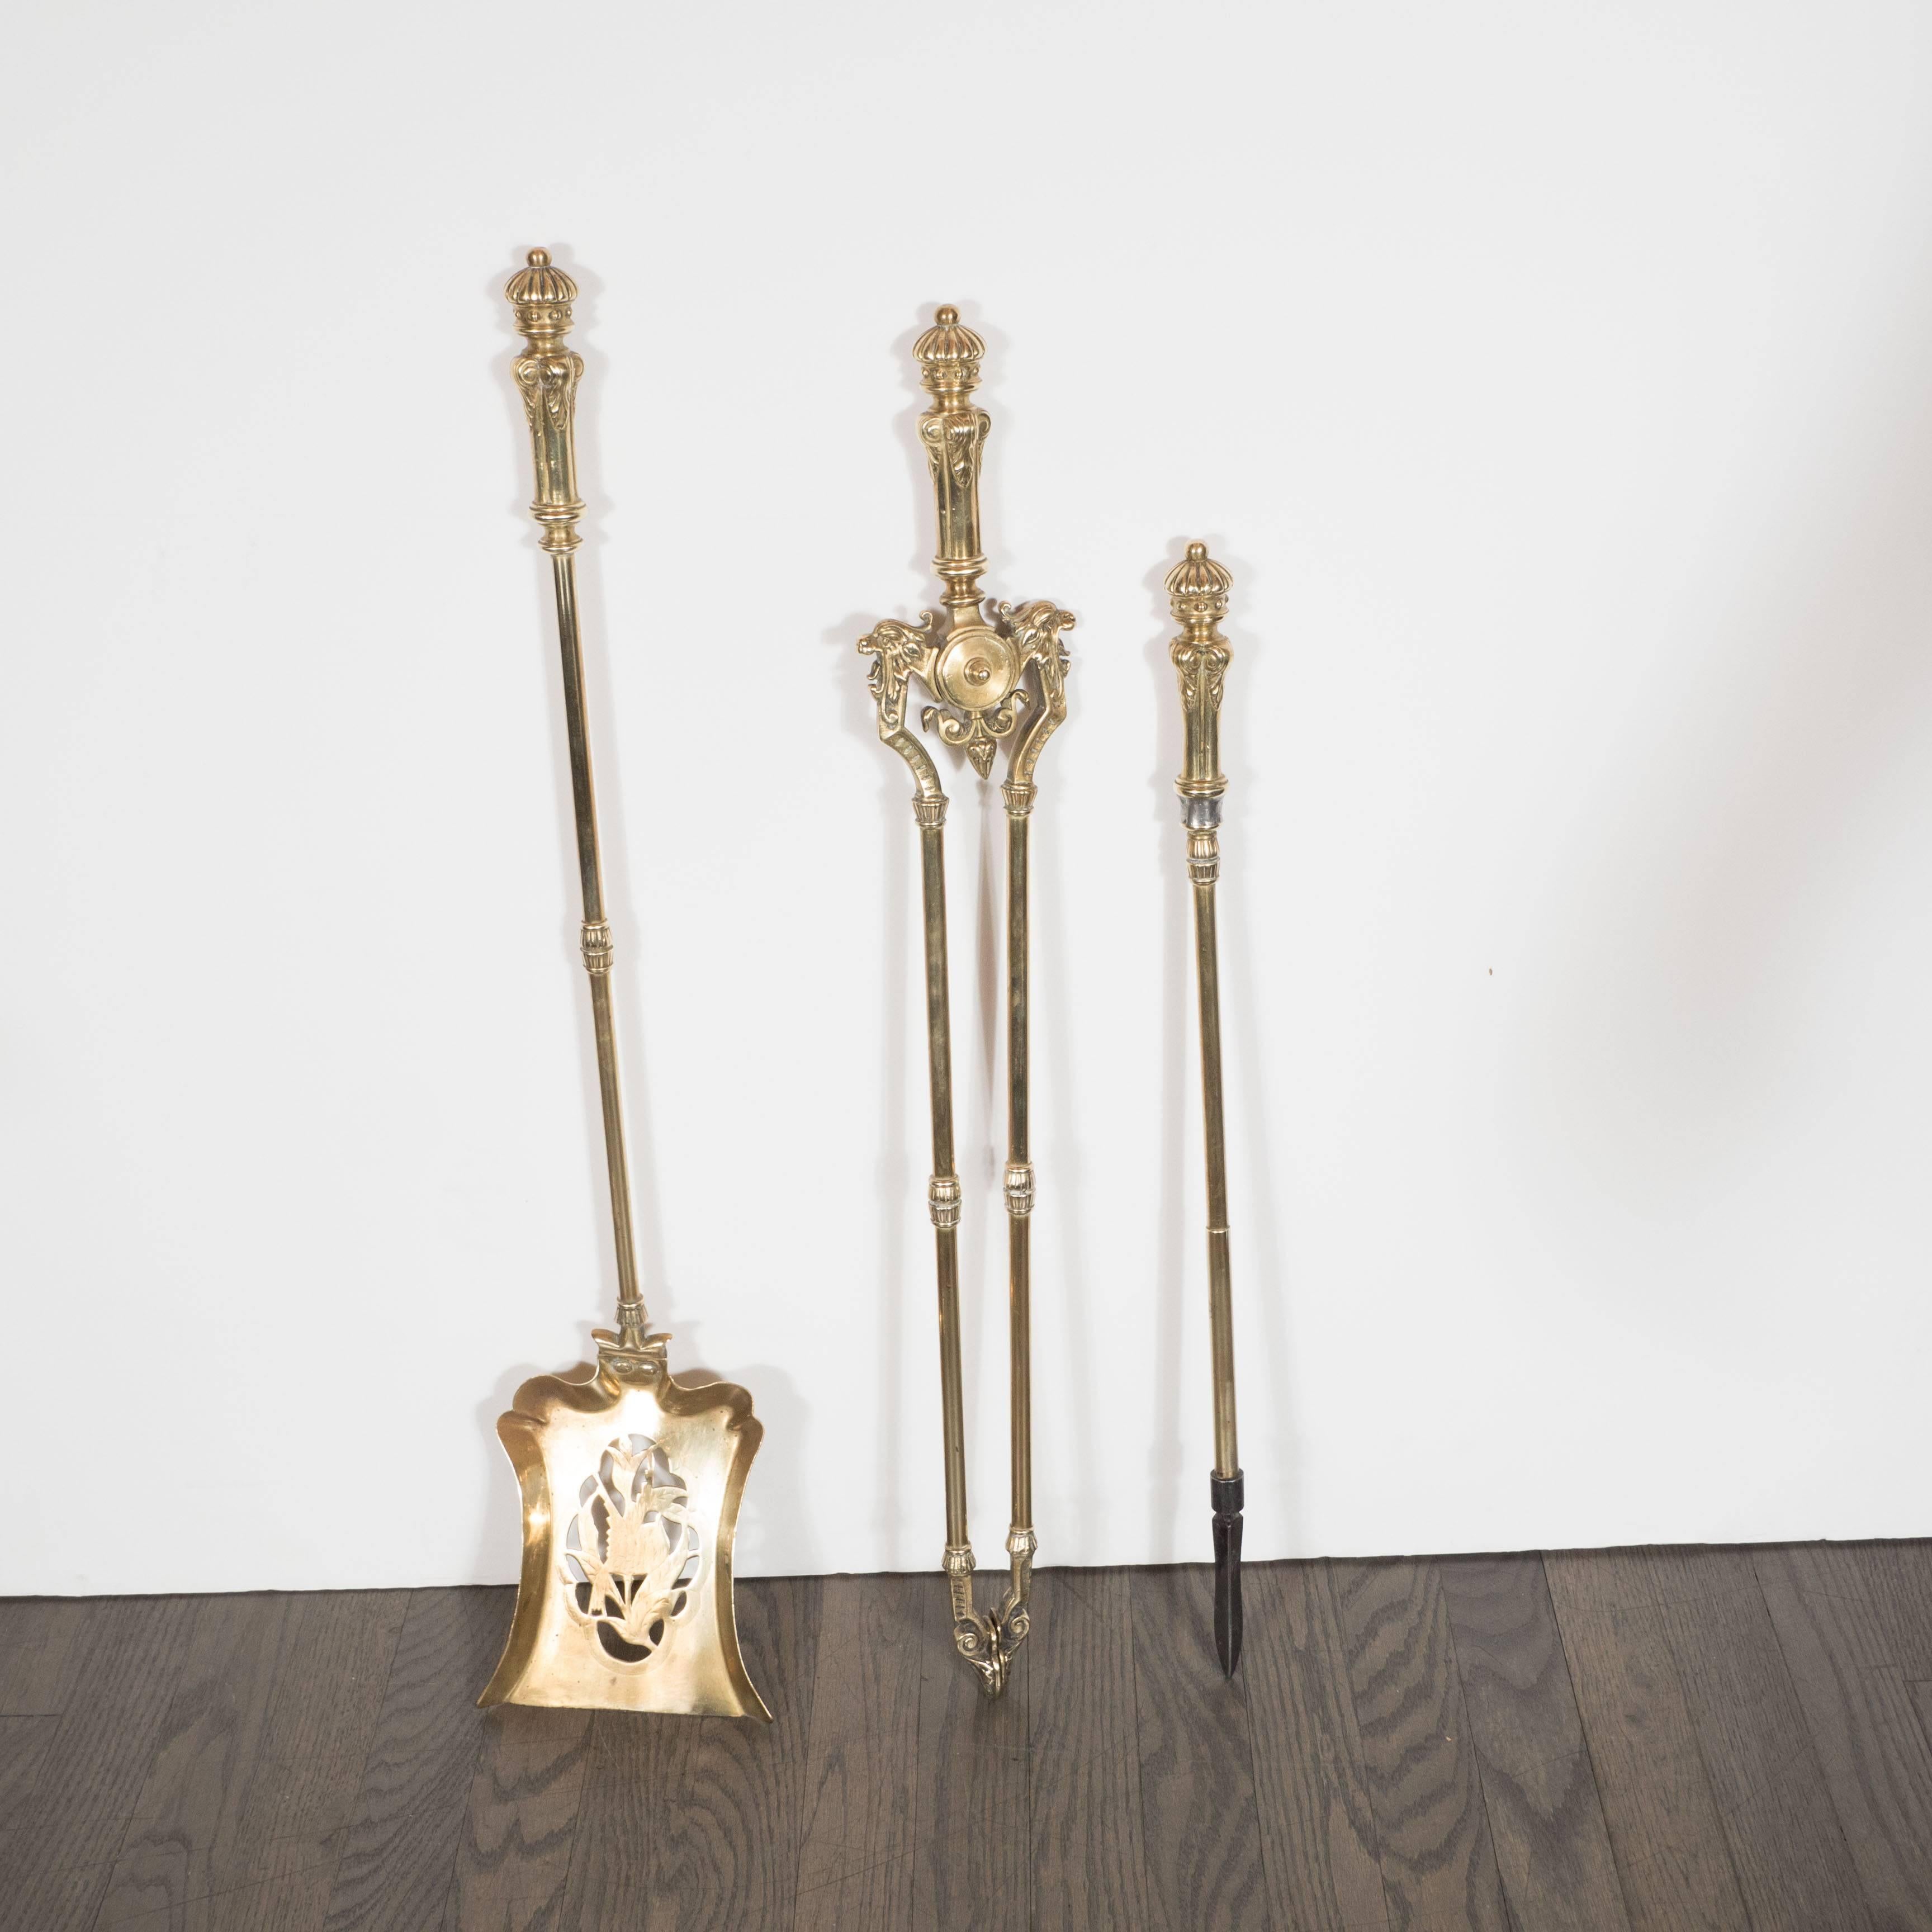 This refined antique brass fire three piece tool set was realized by hand in France, circa 1900. The set is comprised of a shovel, fire tongs and poker that fit neatly into a central stand- all hand fabricated in polished brass featuring